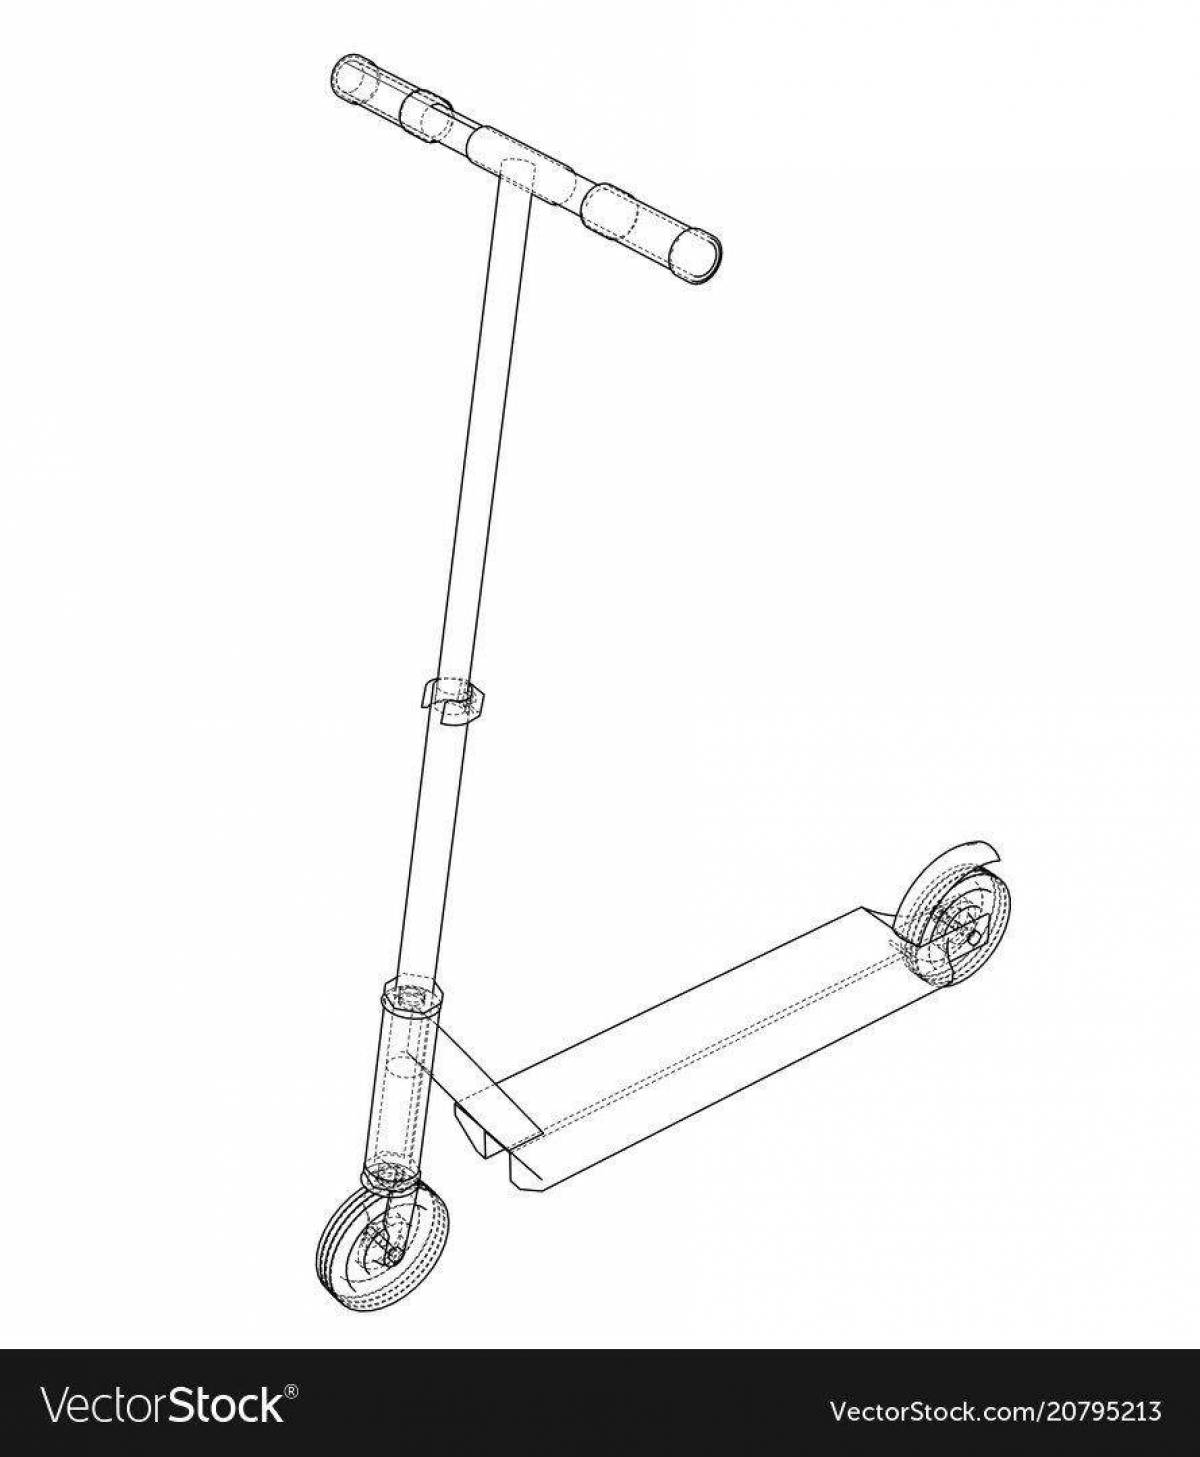 Royal stunt scooter coloring page